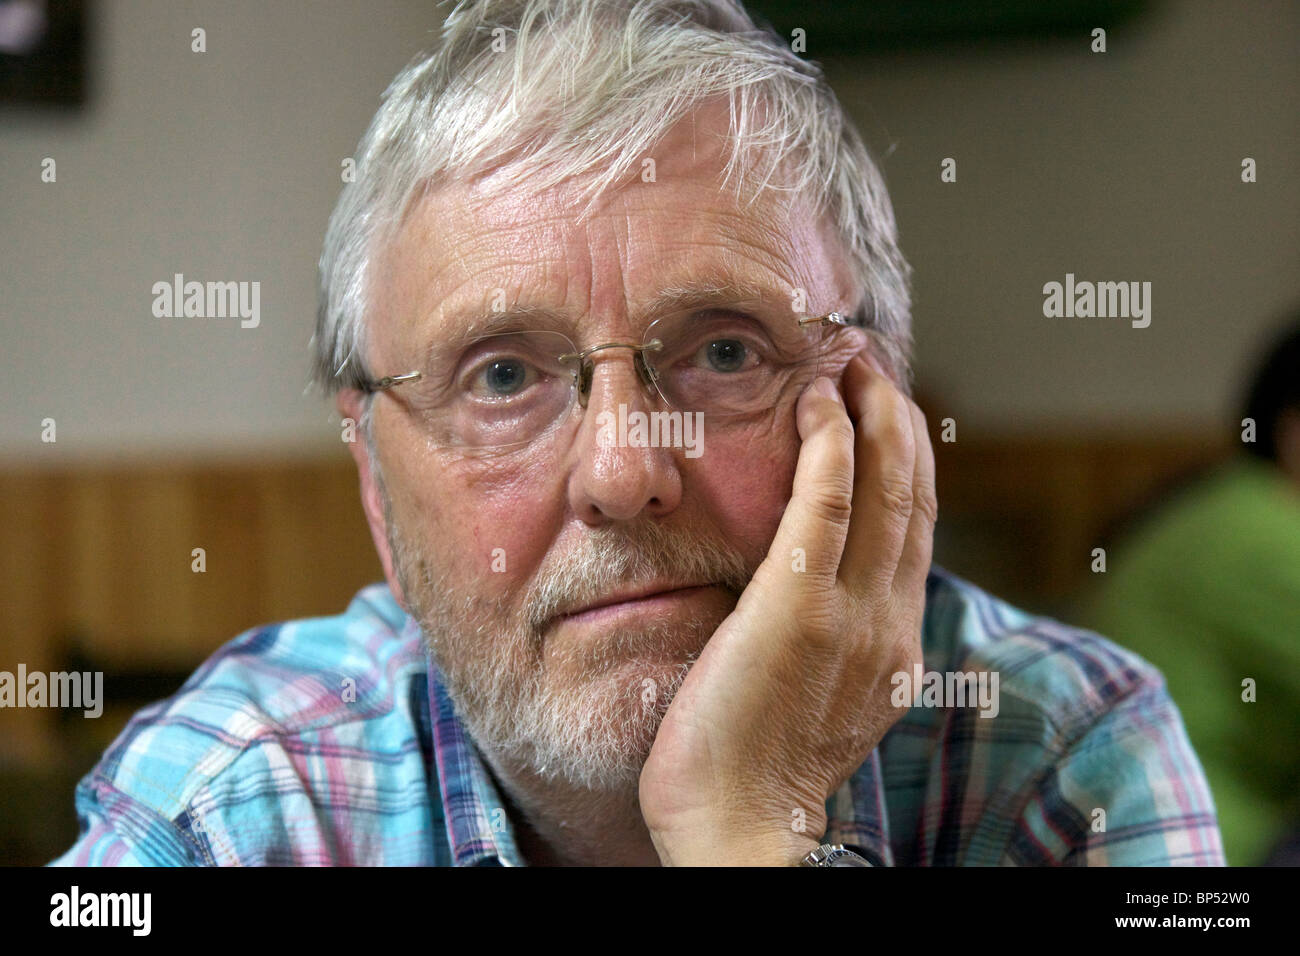 Grumpy Old man with hand on chin portant des lunettes lunettes Banque D'Images